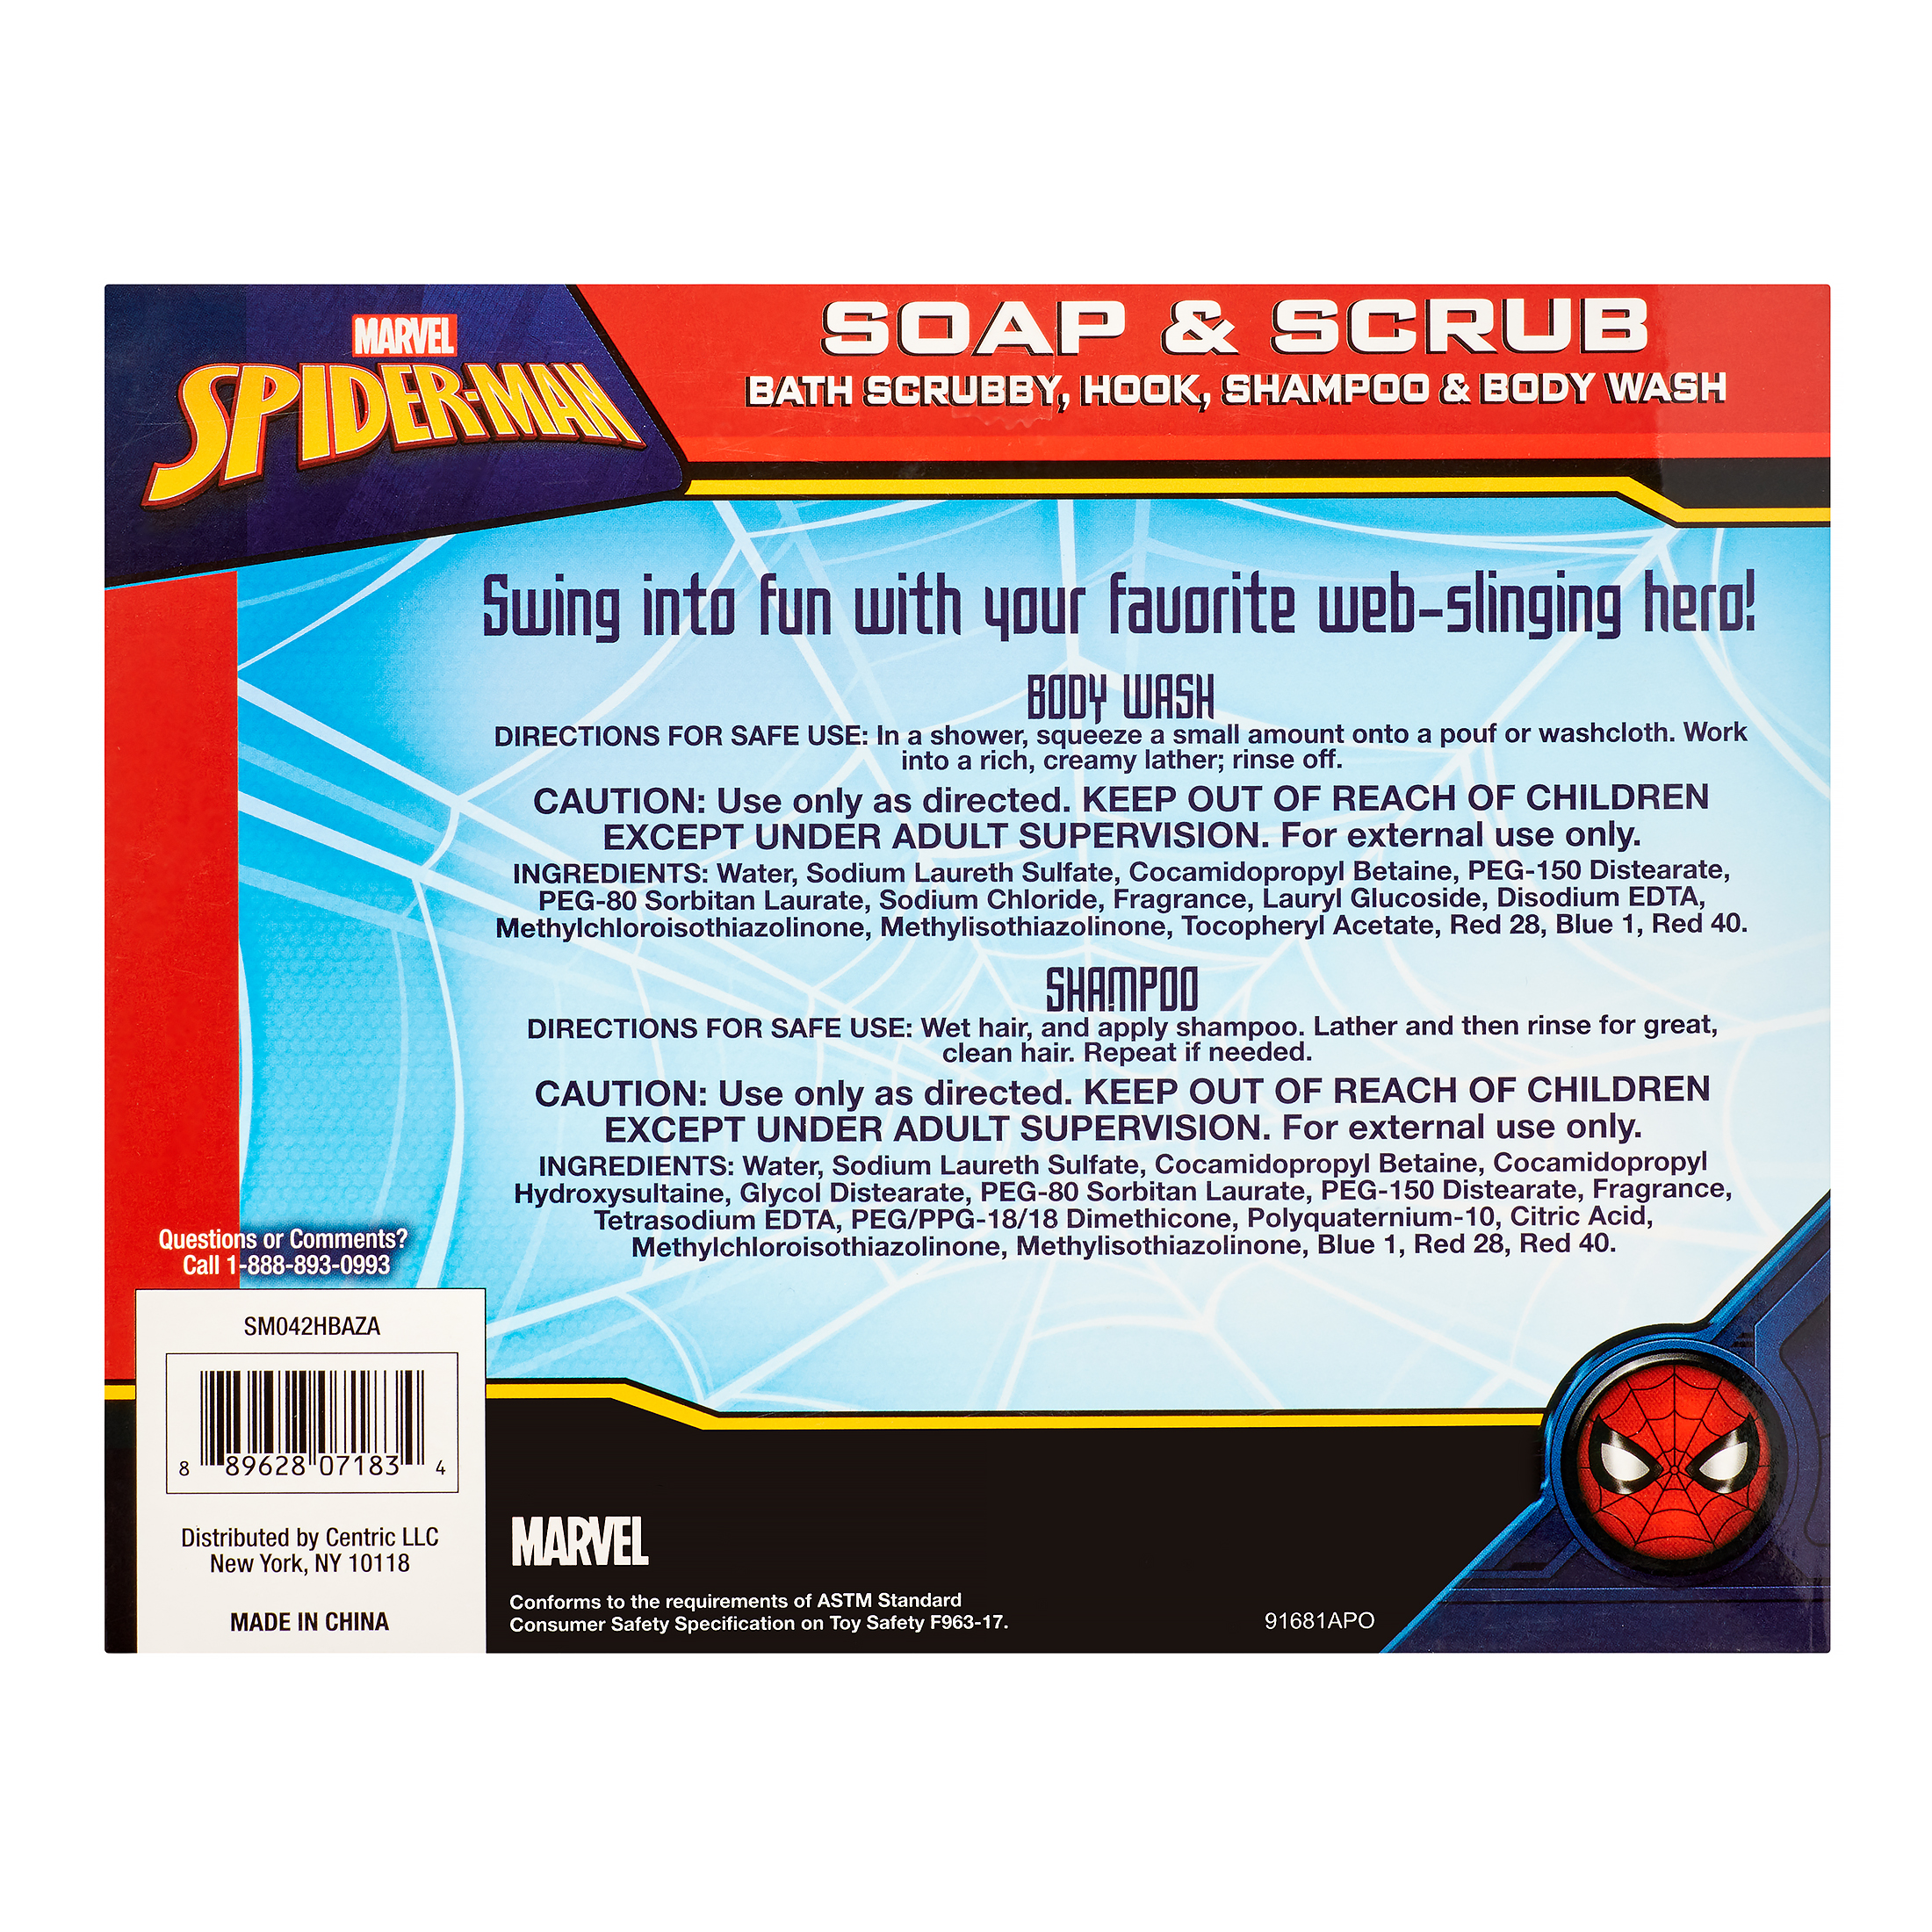 Marvel Spider-Man 4-Piece Soap and Scrub Body Wash and Shampoo Set - image 4 of 5